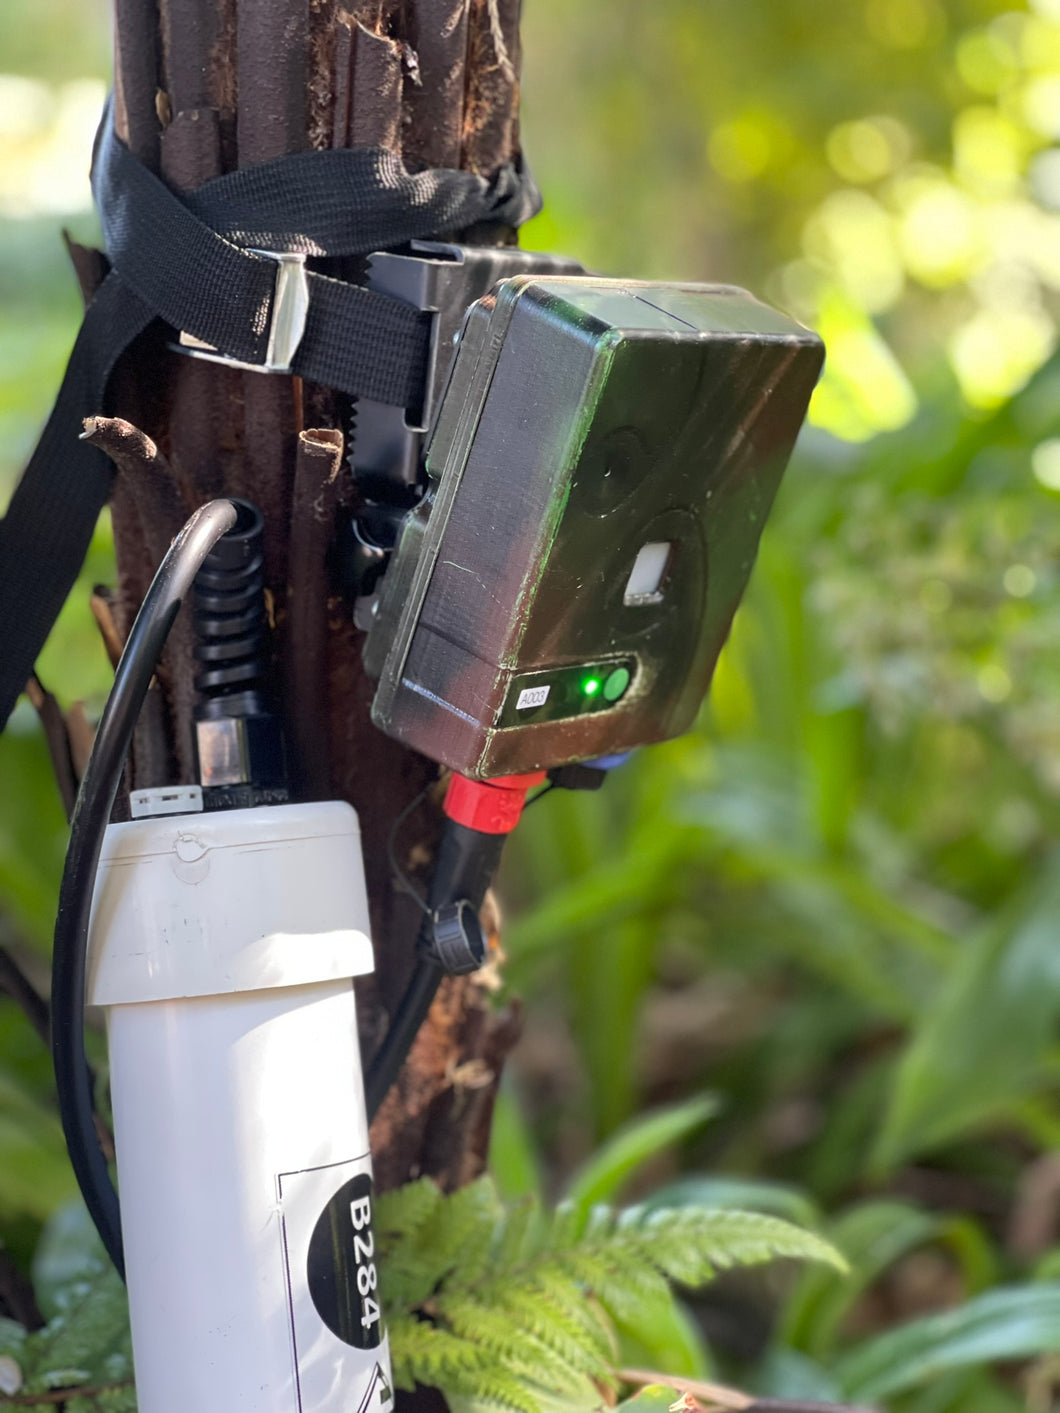 DOC AI Cam: Thermal camera from The Cacophony Project strapped to a tree